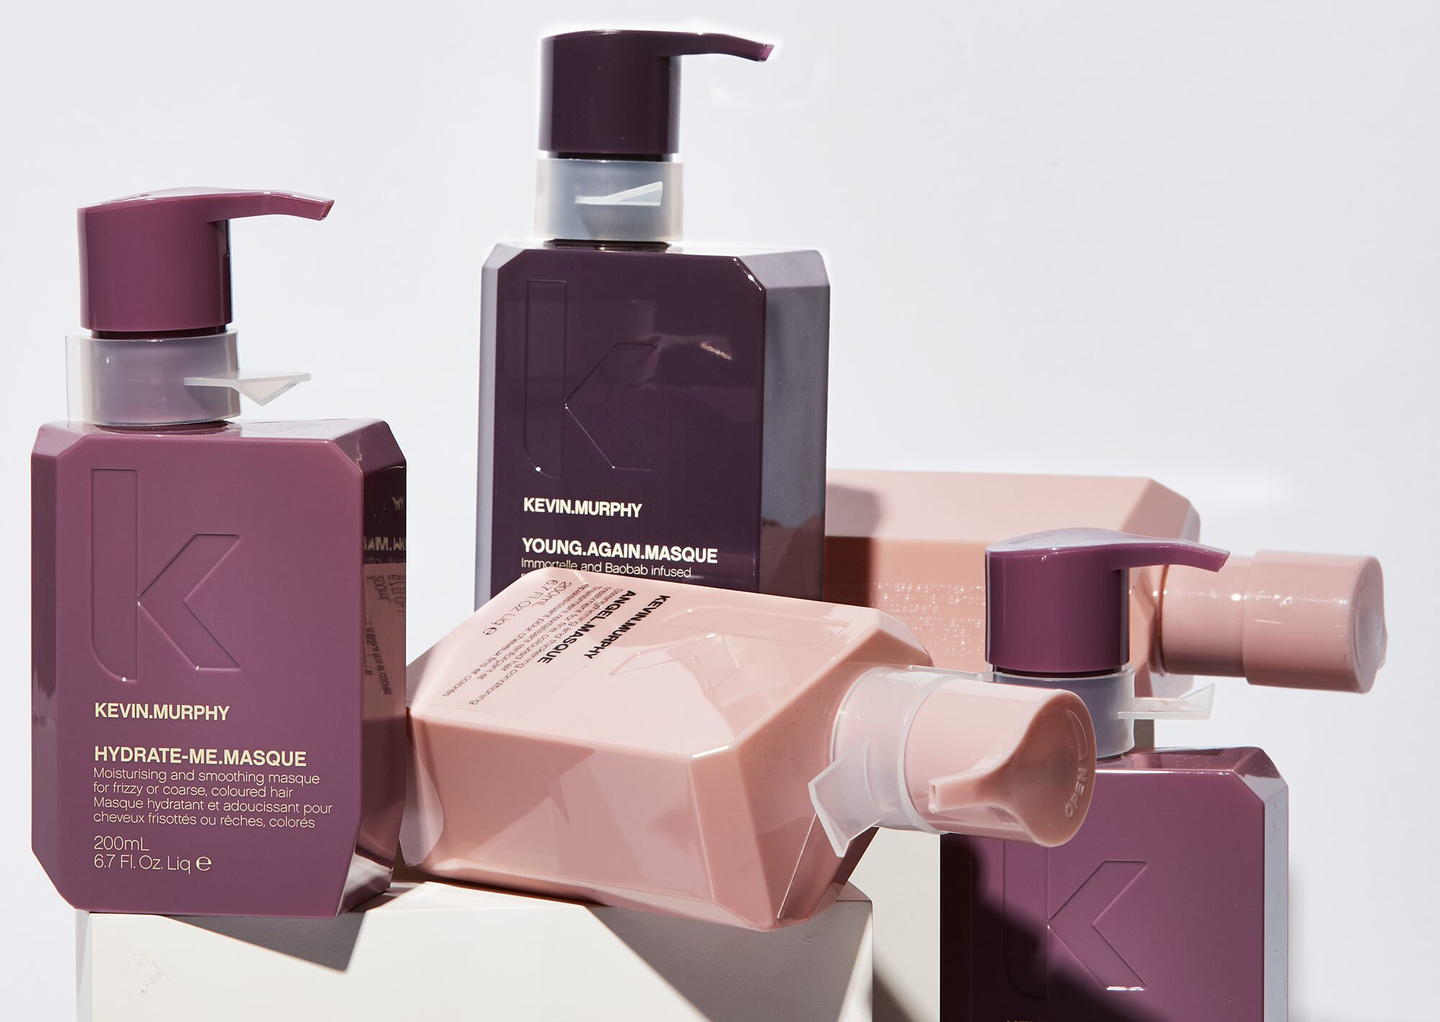 An array of professional hair care products from Kevin Murphy, set against a clean white backdrop.